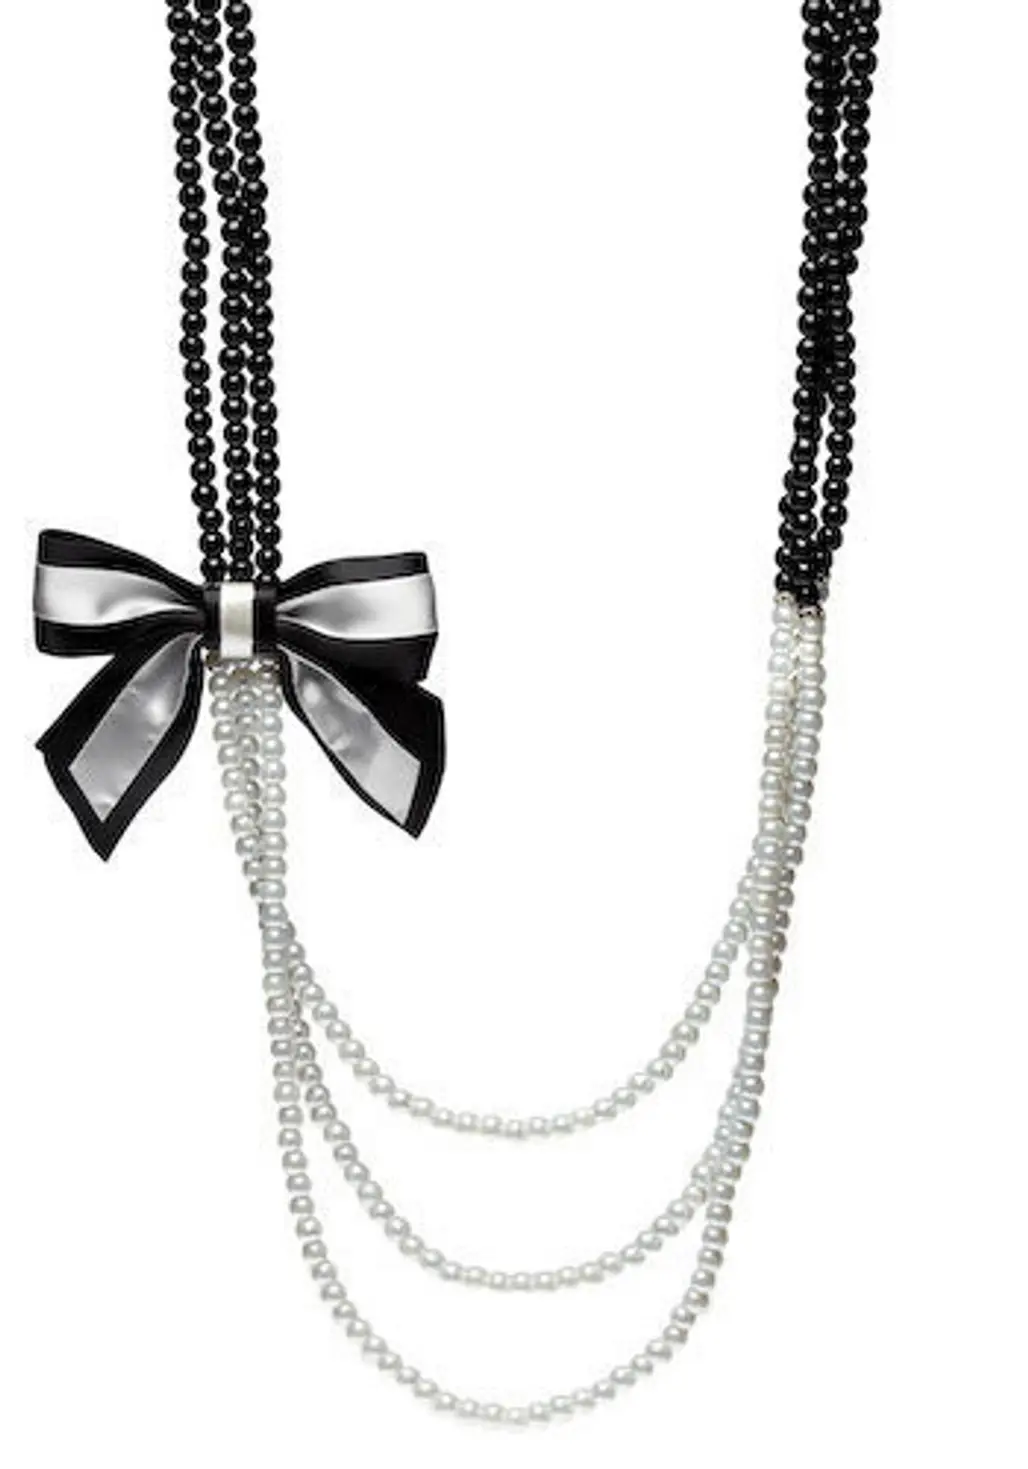 ModCloth “Tiers of Pearls” Necklace